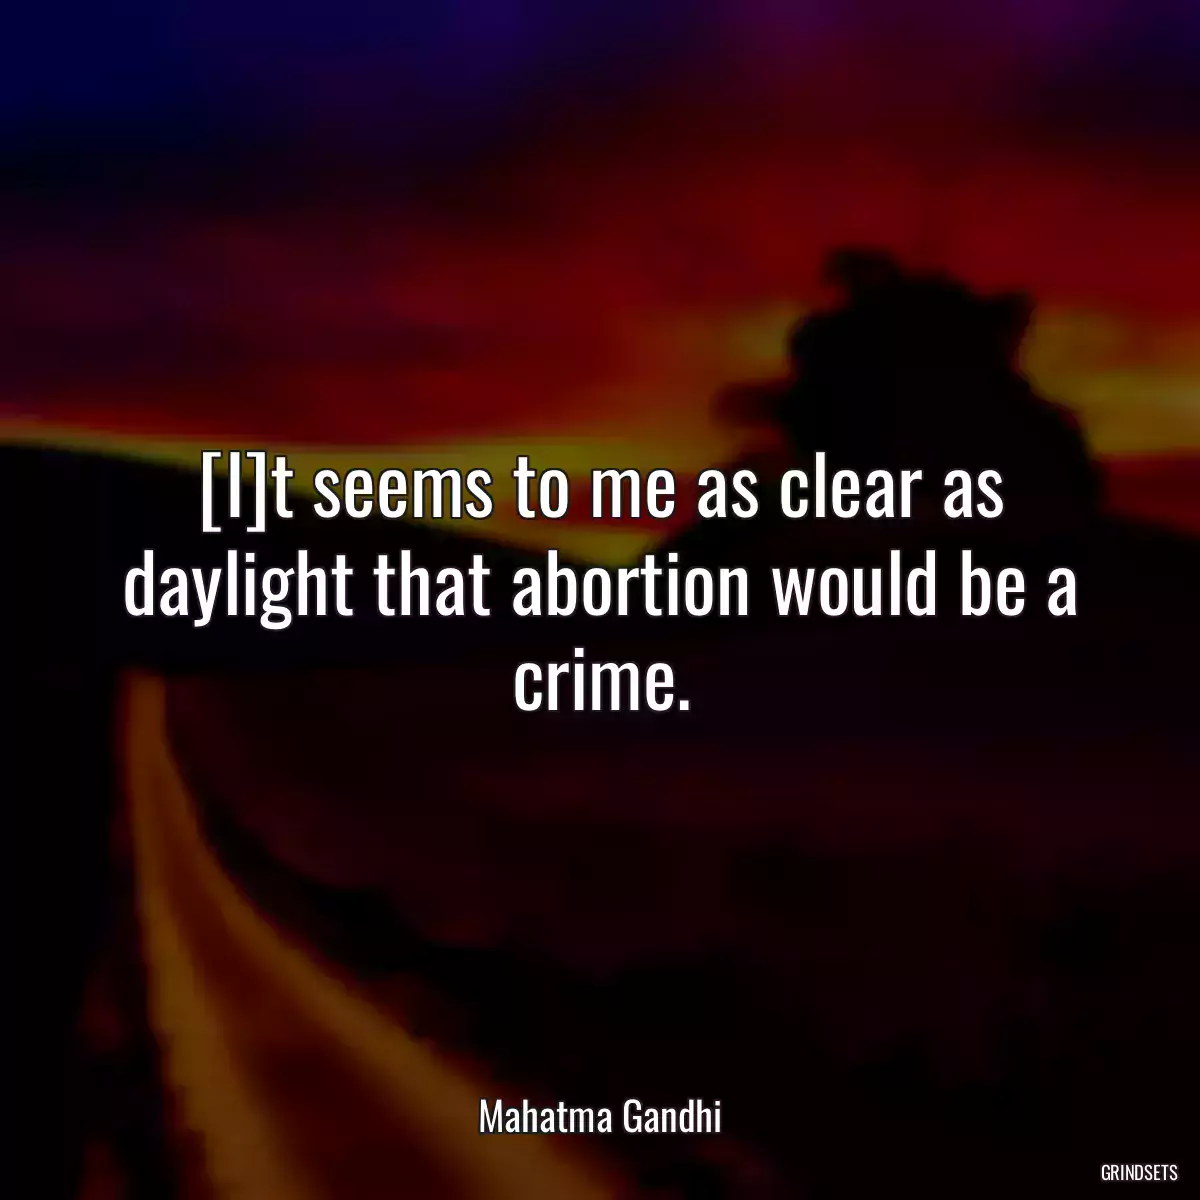 [I]t seems to me as clear as daylight that abortion would be a crime.